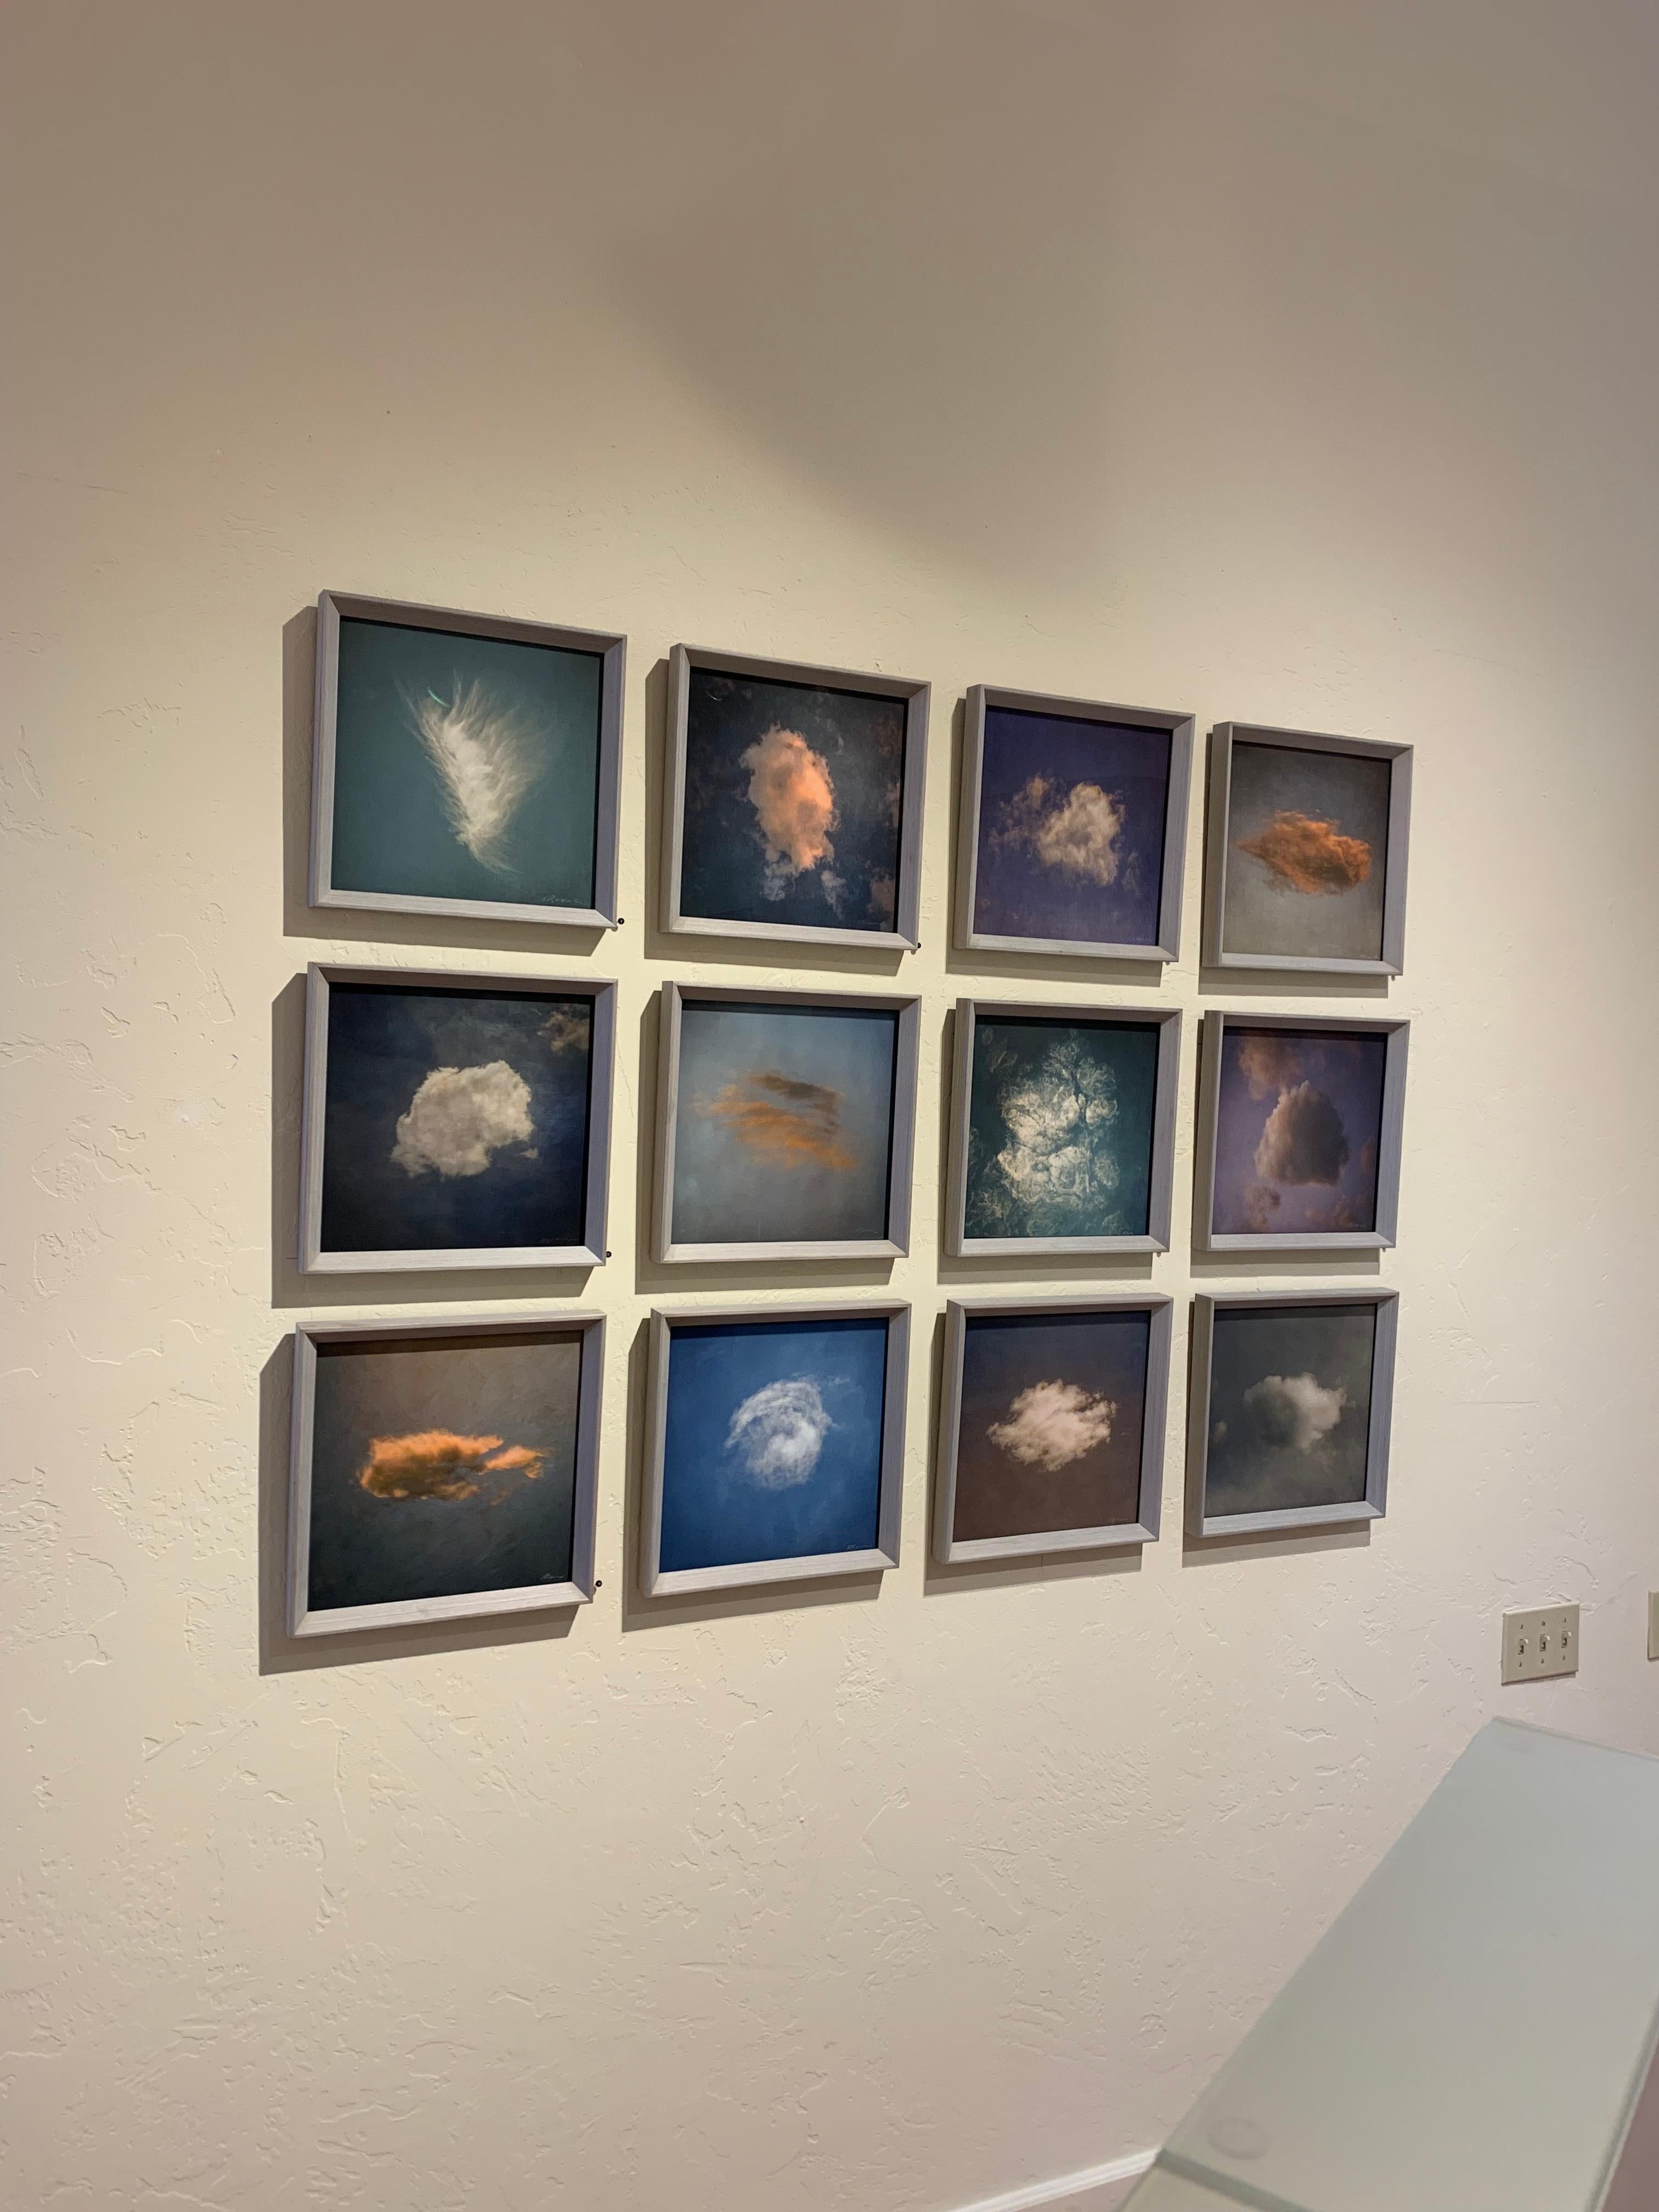 Twelve Clouds, Softly, Slowly (E) - Photograph by Kate Breakey